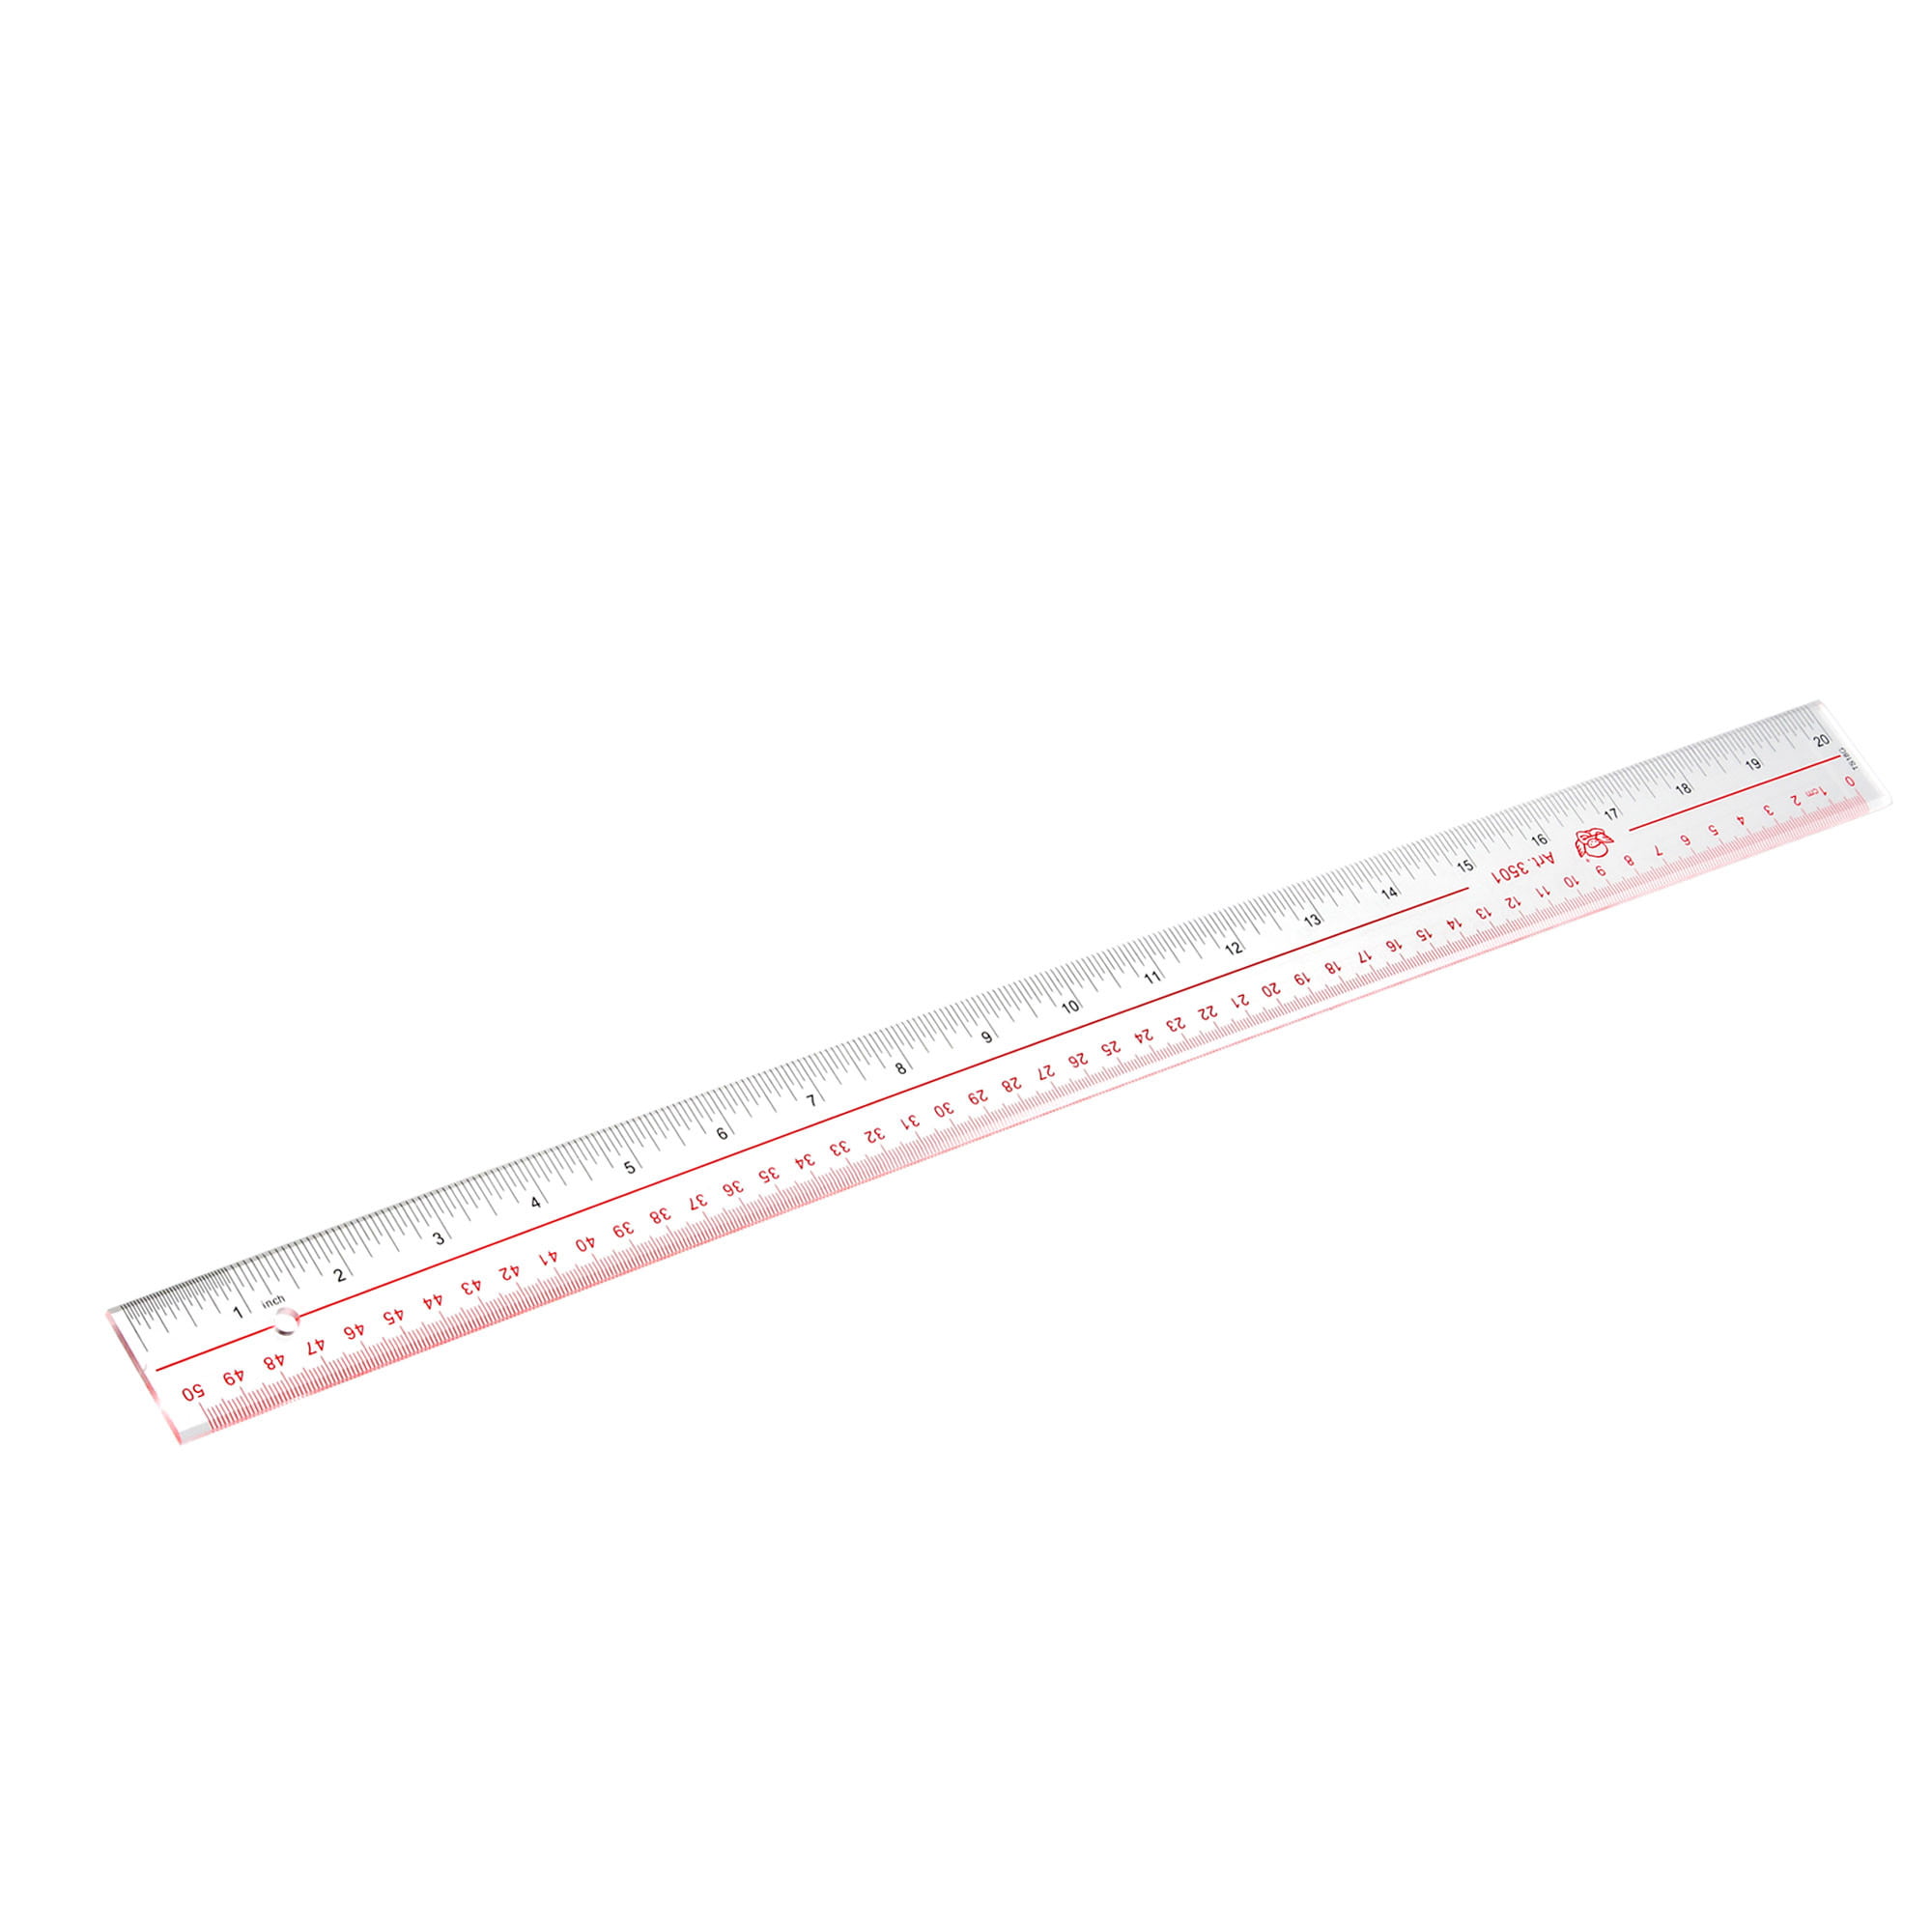 50cm Wooden Ruler Metric Measuring Tools Drawing Straight Ruler Stationery 